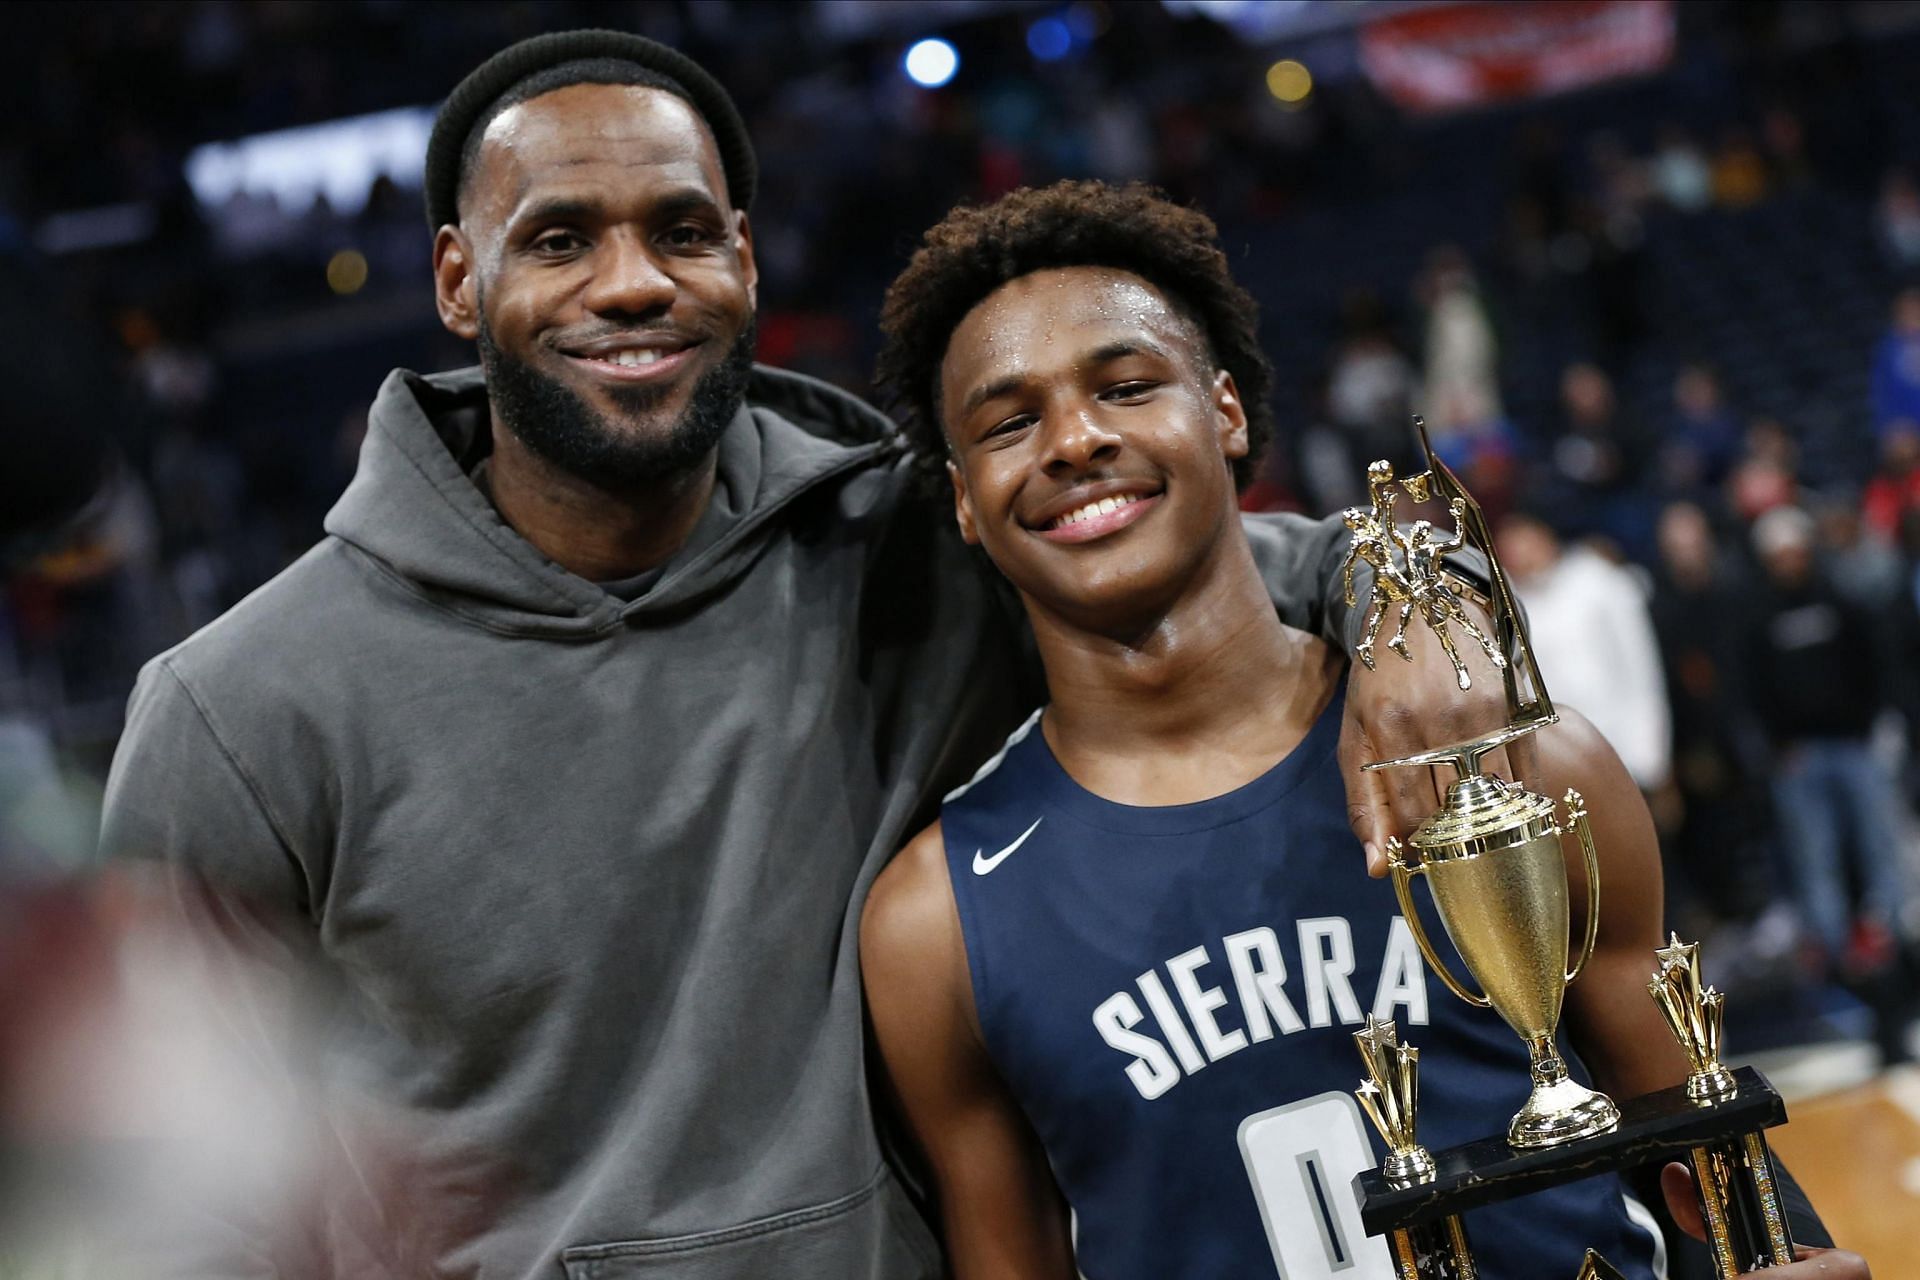 LeBron James could eventually see his eldest son Bronny James join him in the NBA. [Photo: Bleacher Report]